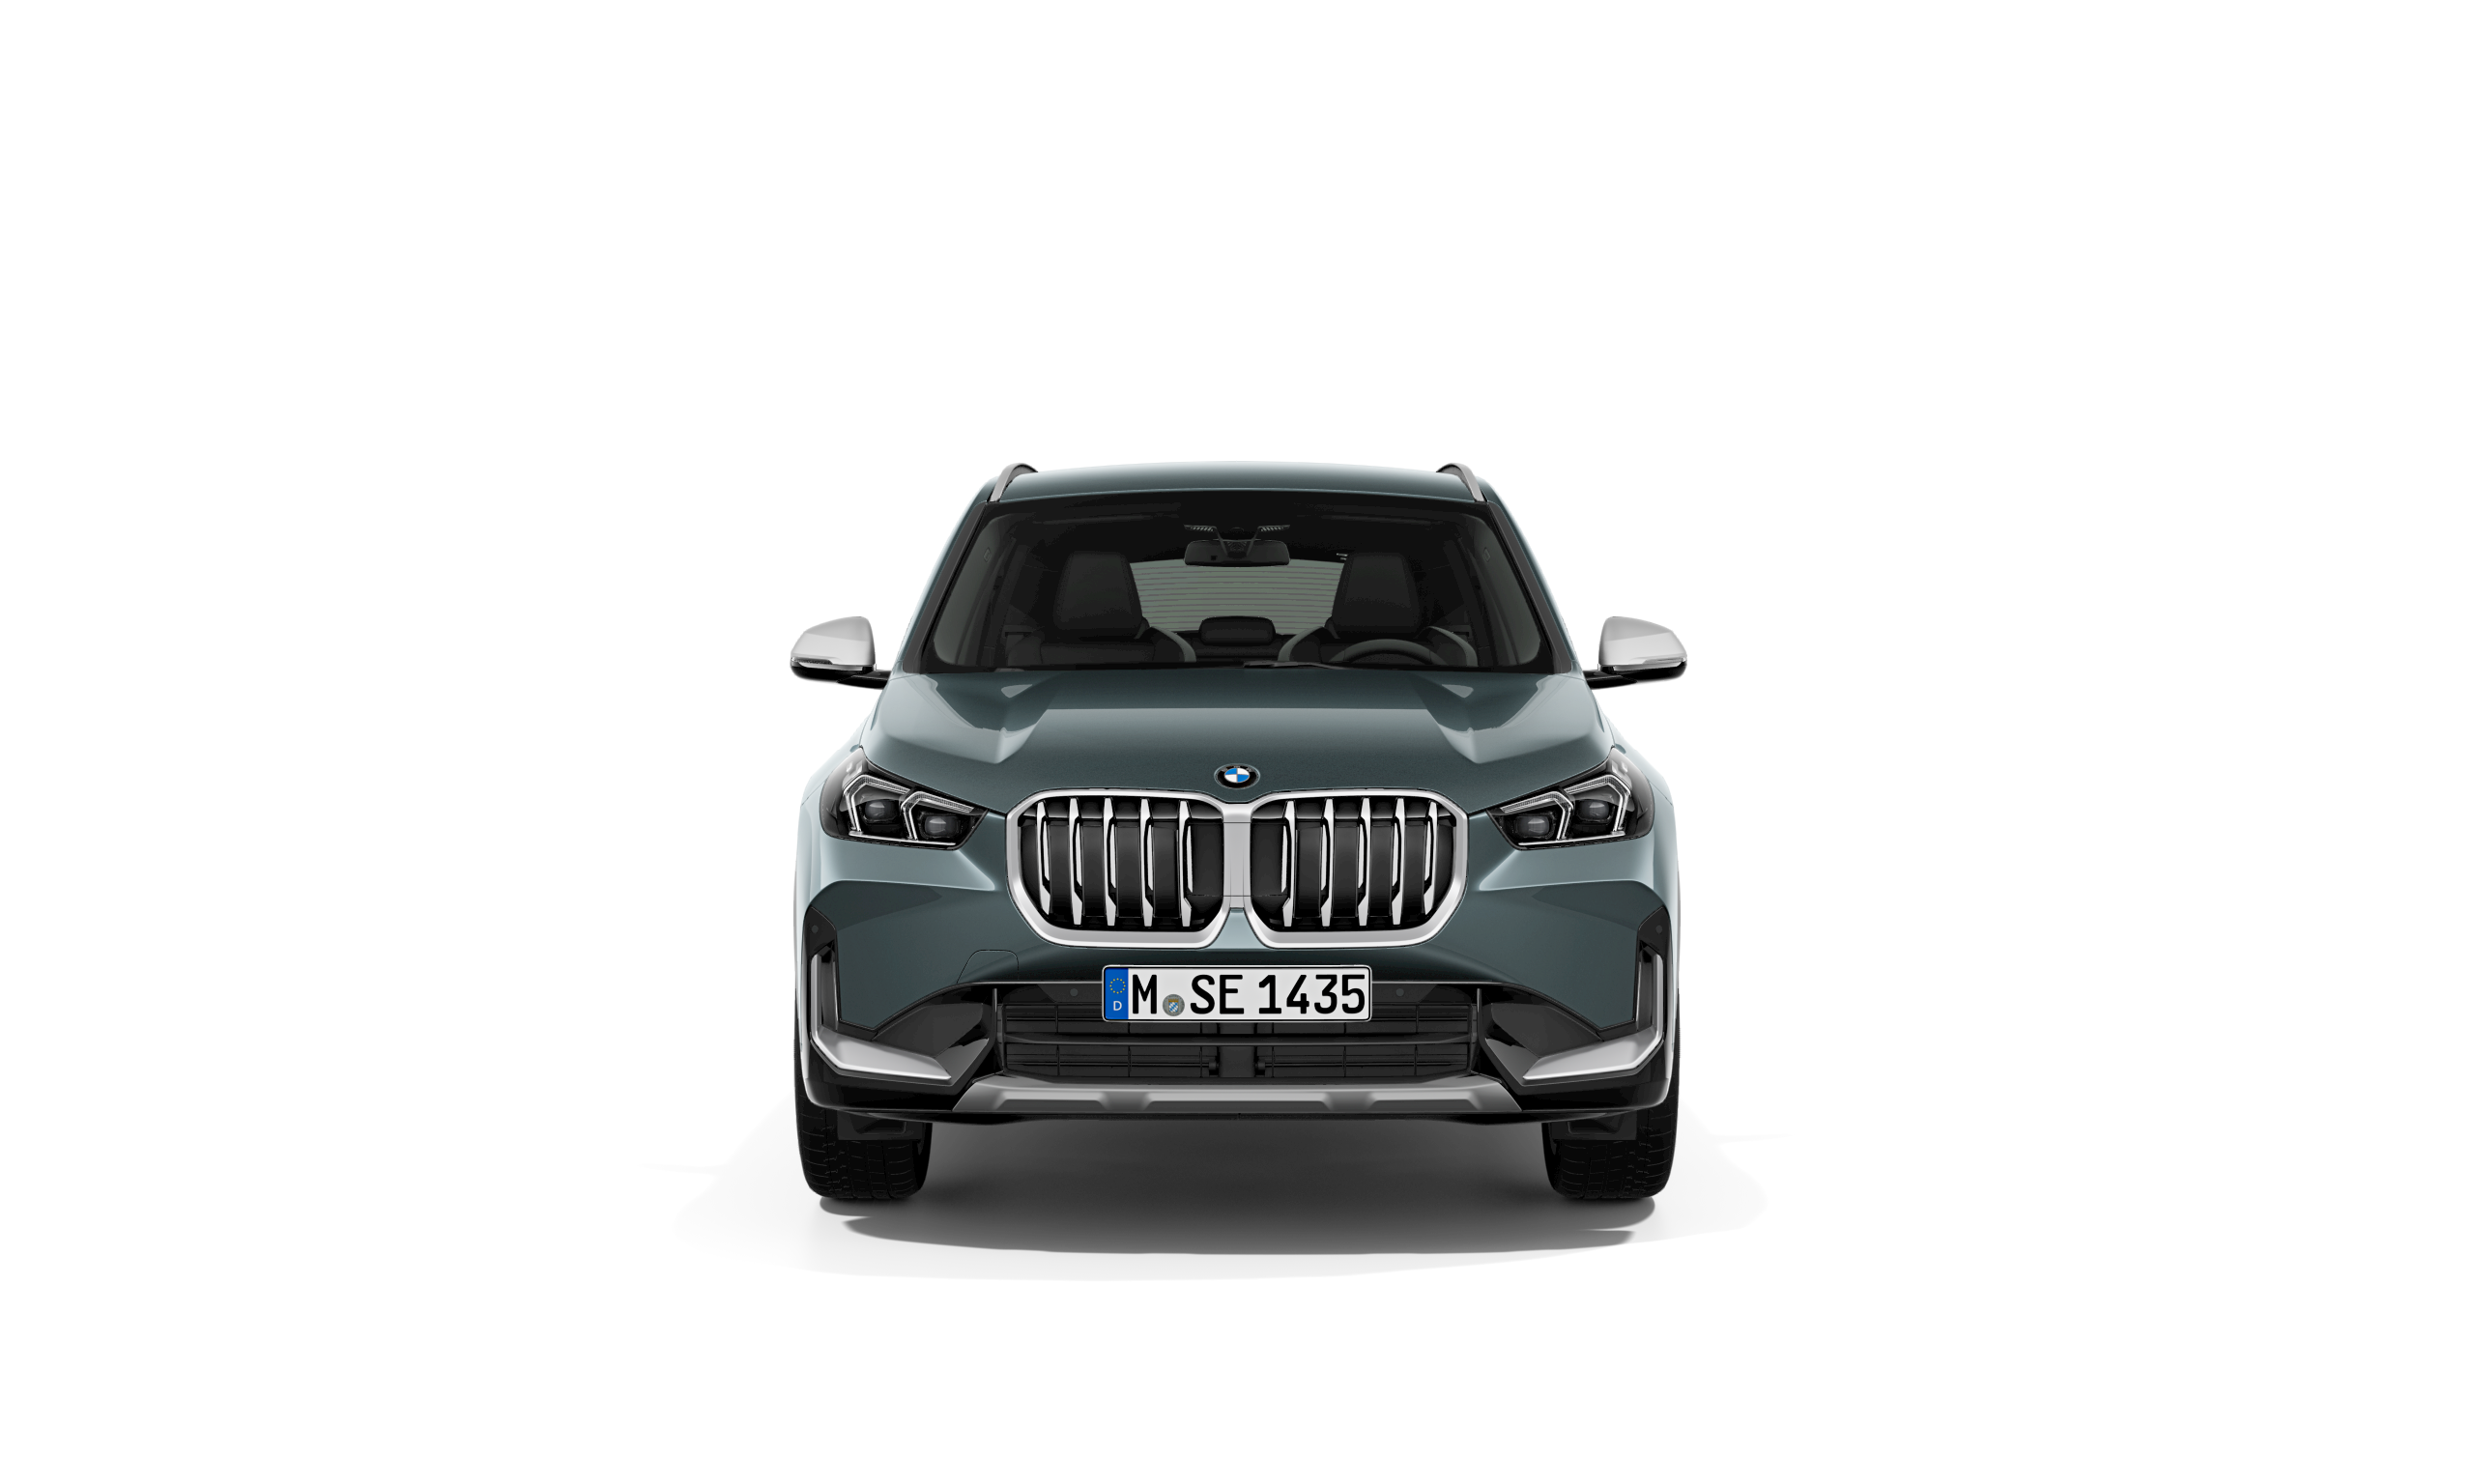 bmw malaysia launches locally assembled bmw x1 sdrive20i